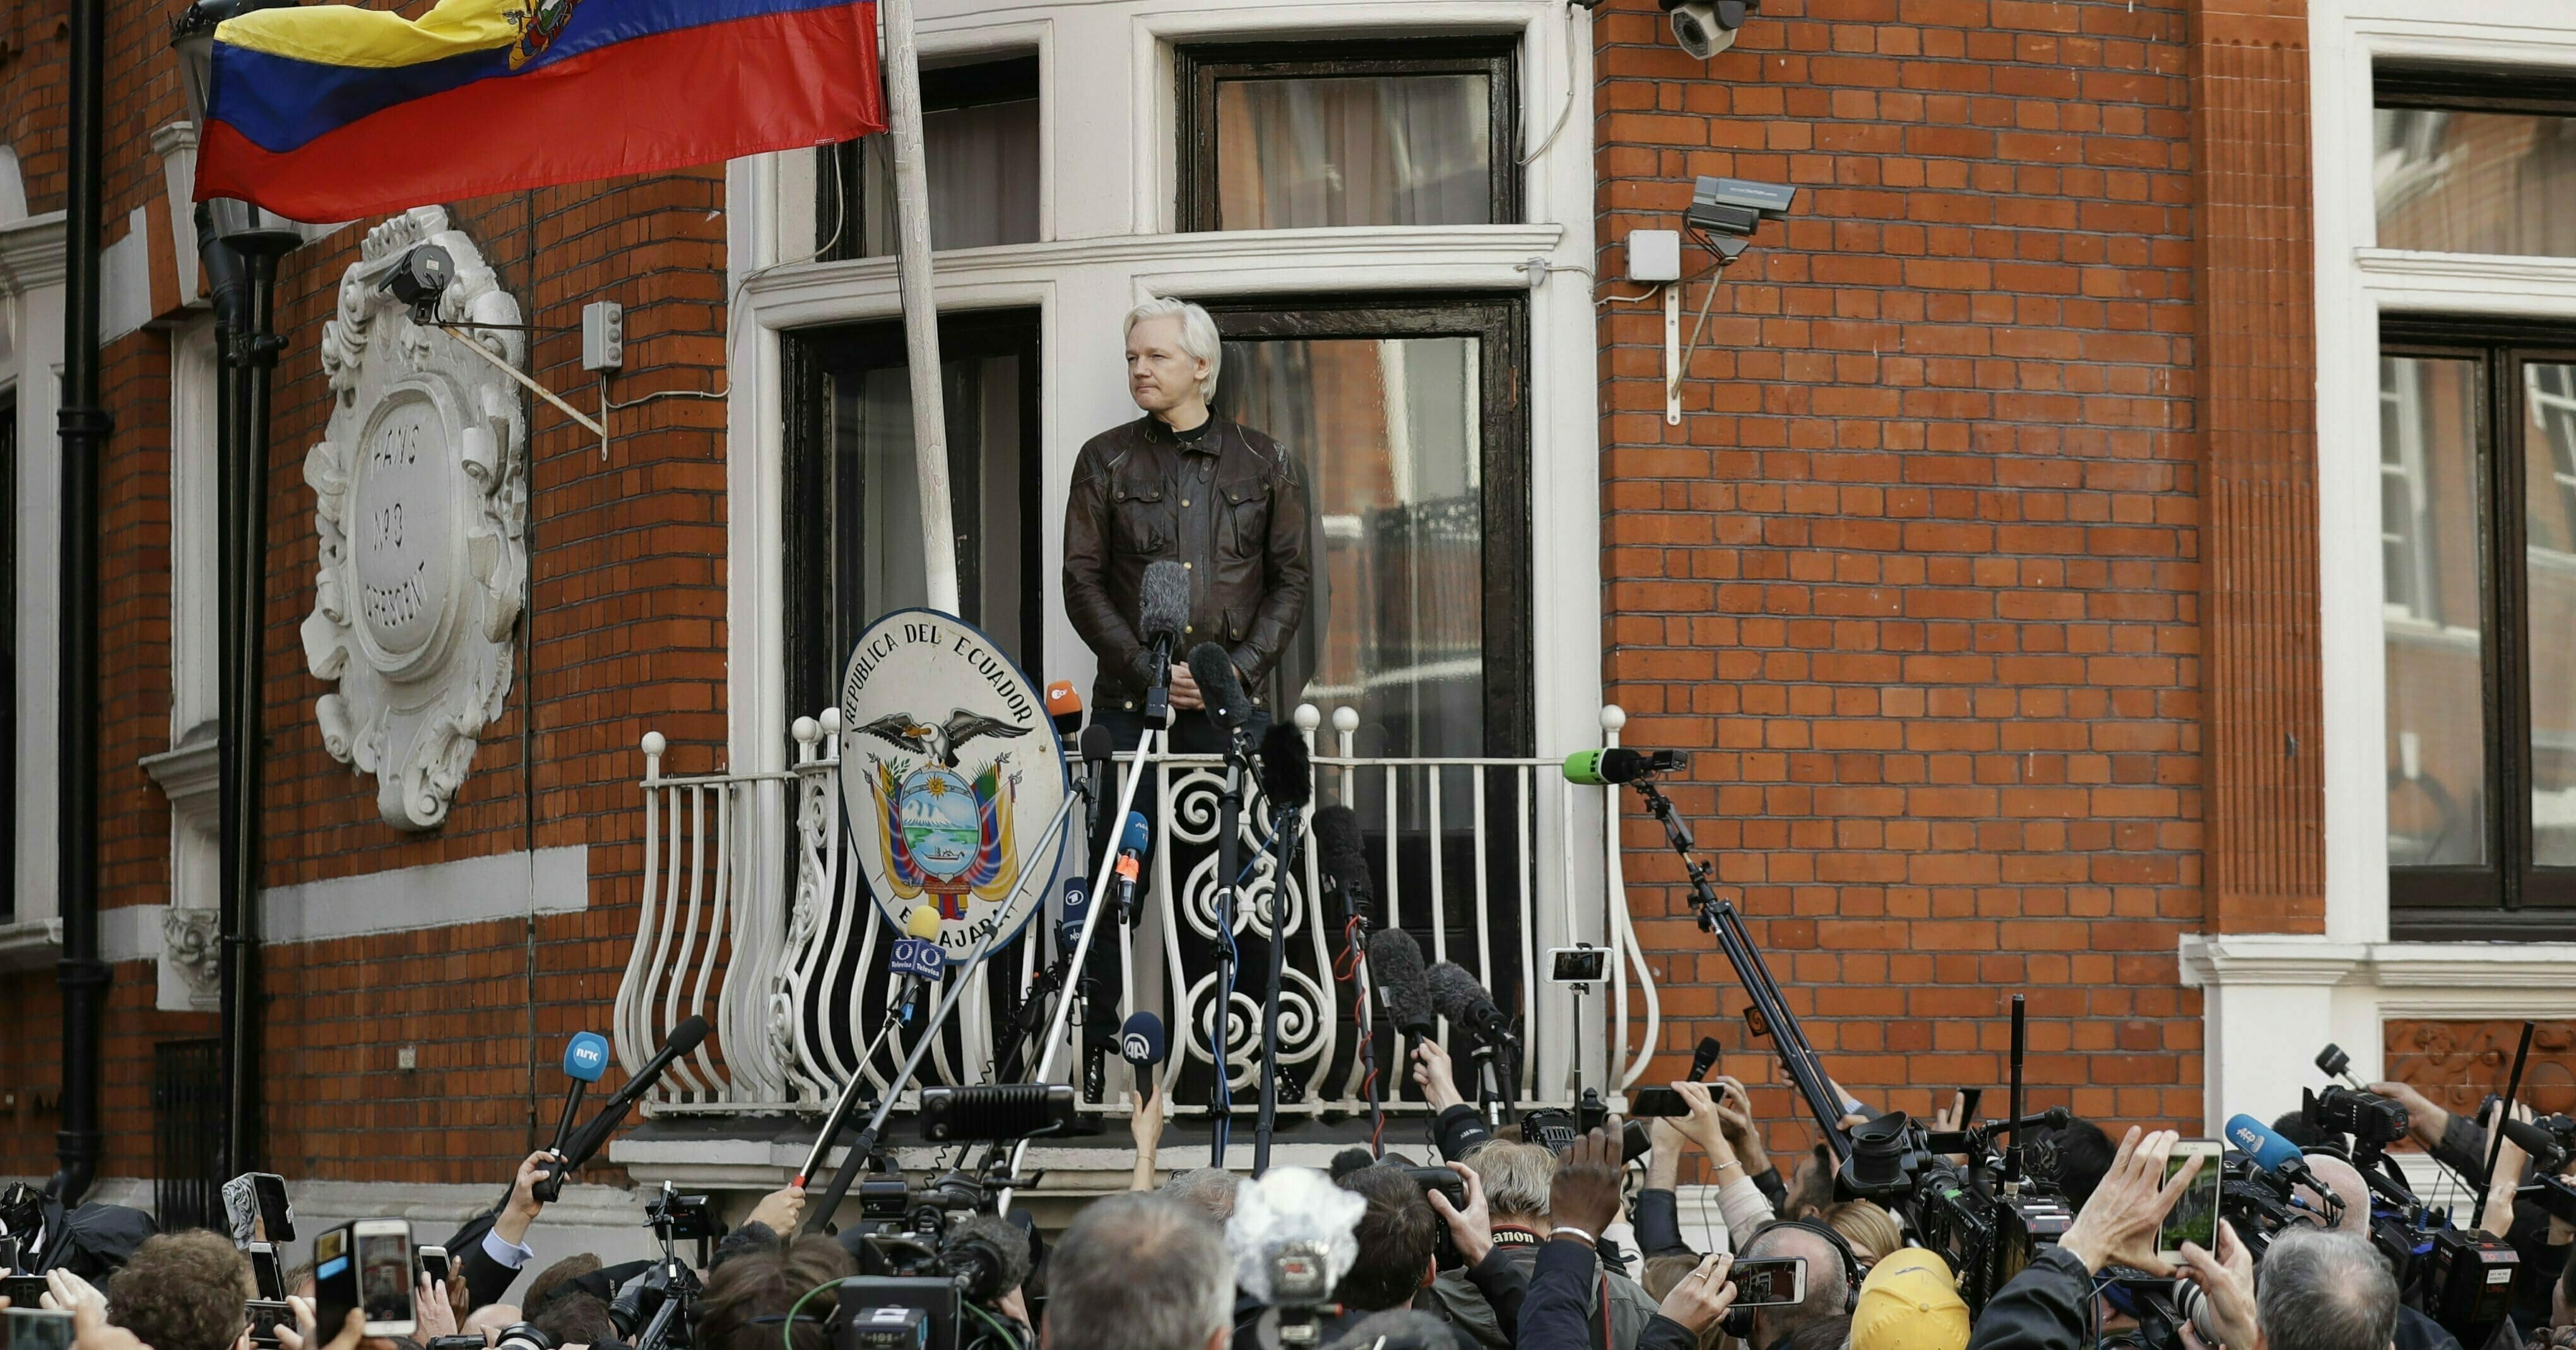 WikiLeaks founder Julian Assange looks out from the balcony of the Ecuadorian embassy May 19, 2017.